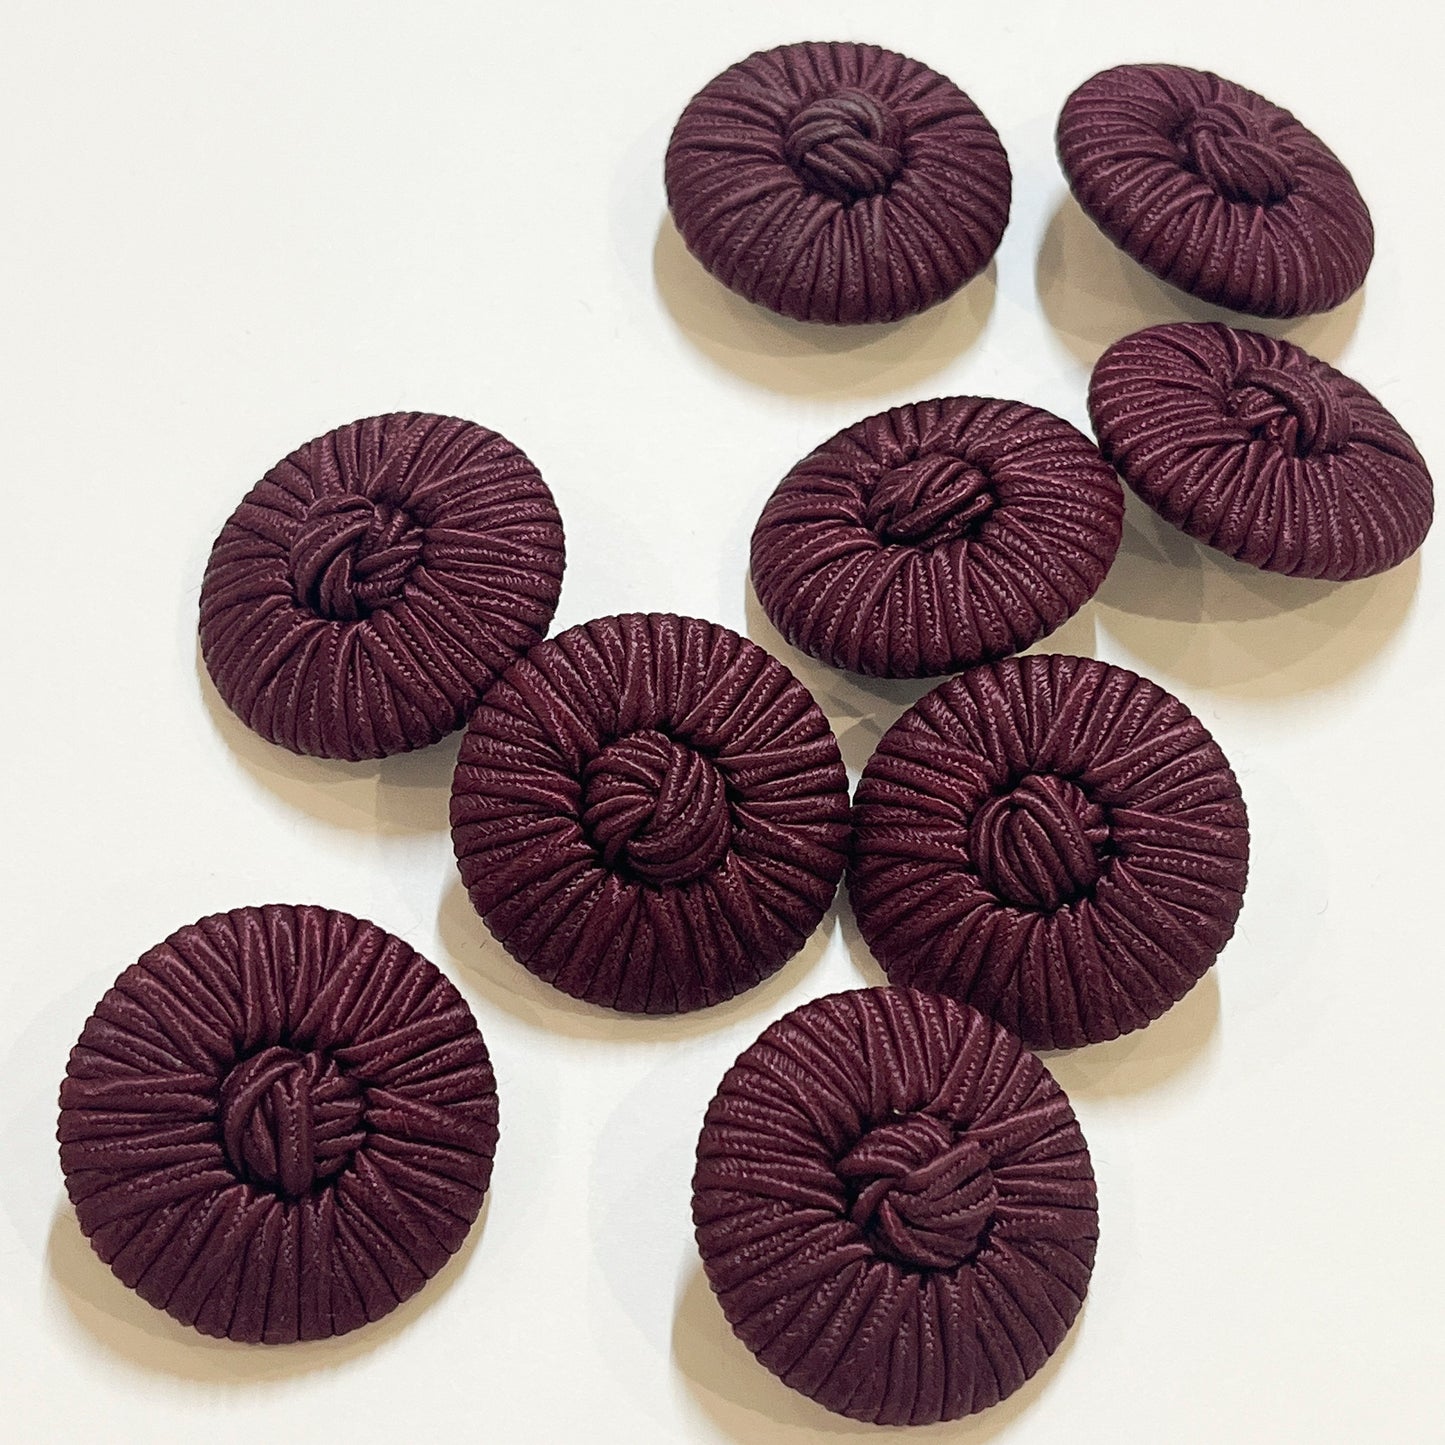 BURGANDY 32MM Vintage passementerie cord buttons, we believe to be from the 1980s. Would make a beautiful feature button on a cape, coat or jacket, and the perfect button for bridal wear or evening wear. Buttons backs are plastic with a loop shank.